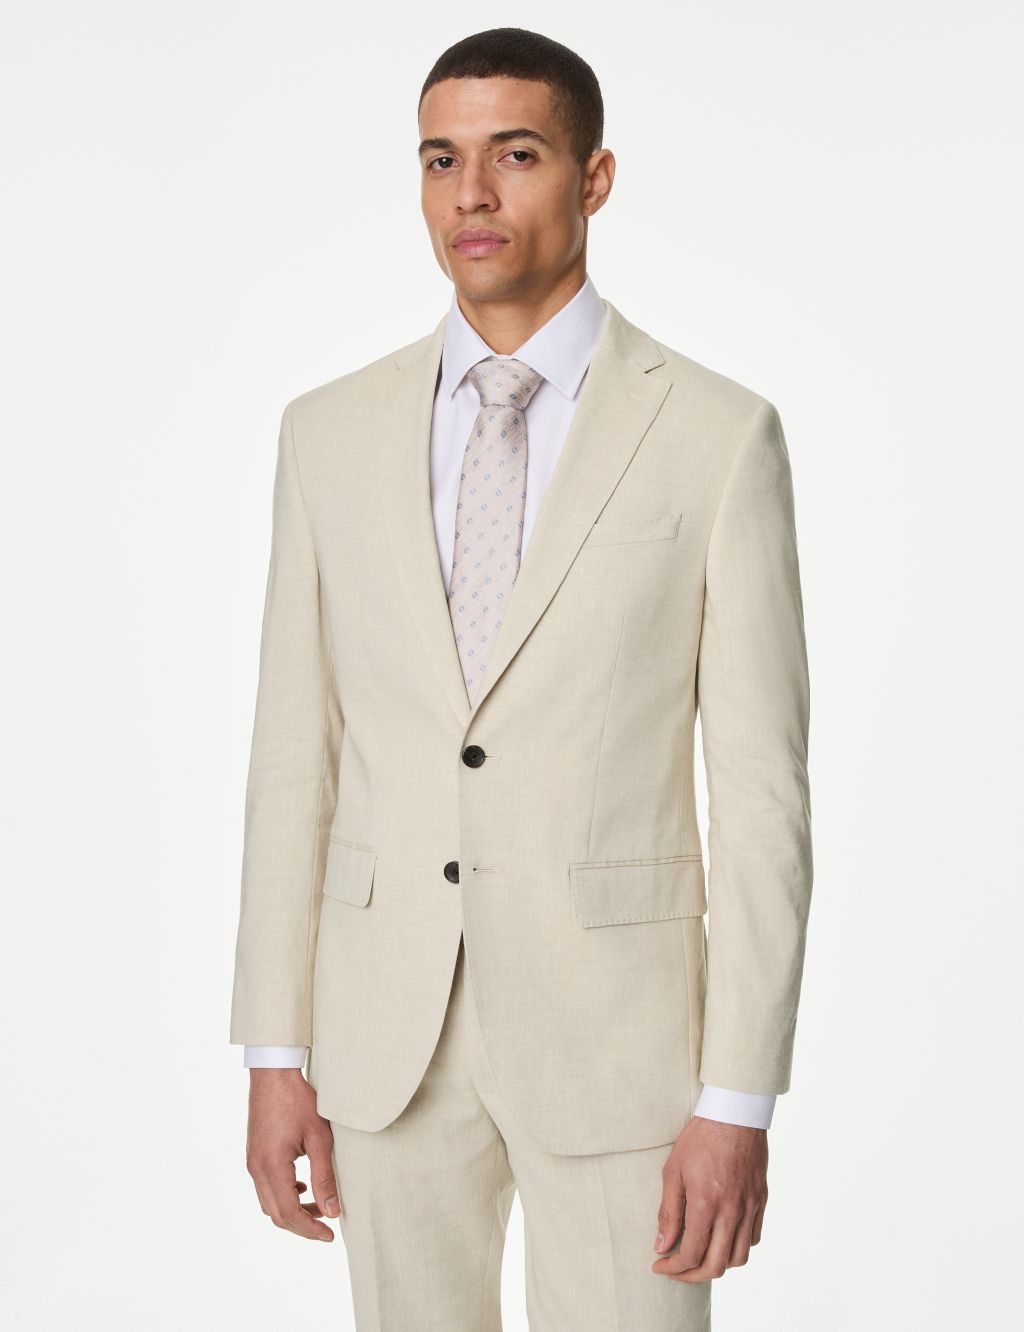 Tailored Fit Italian Linen Miracle™ Suit Jacket image 1